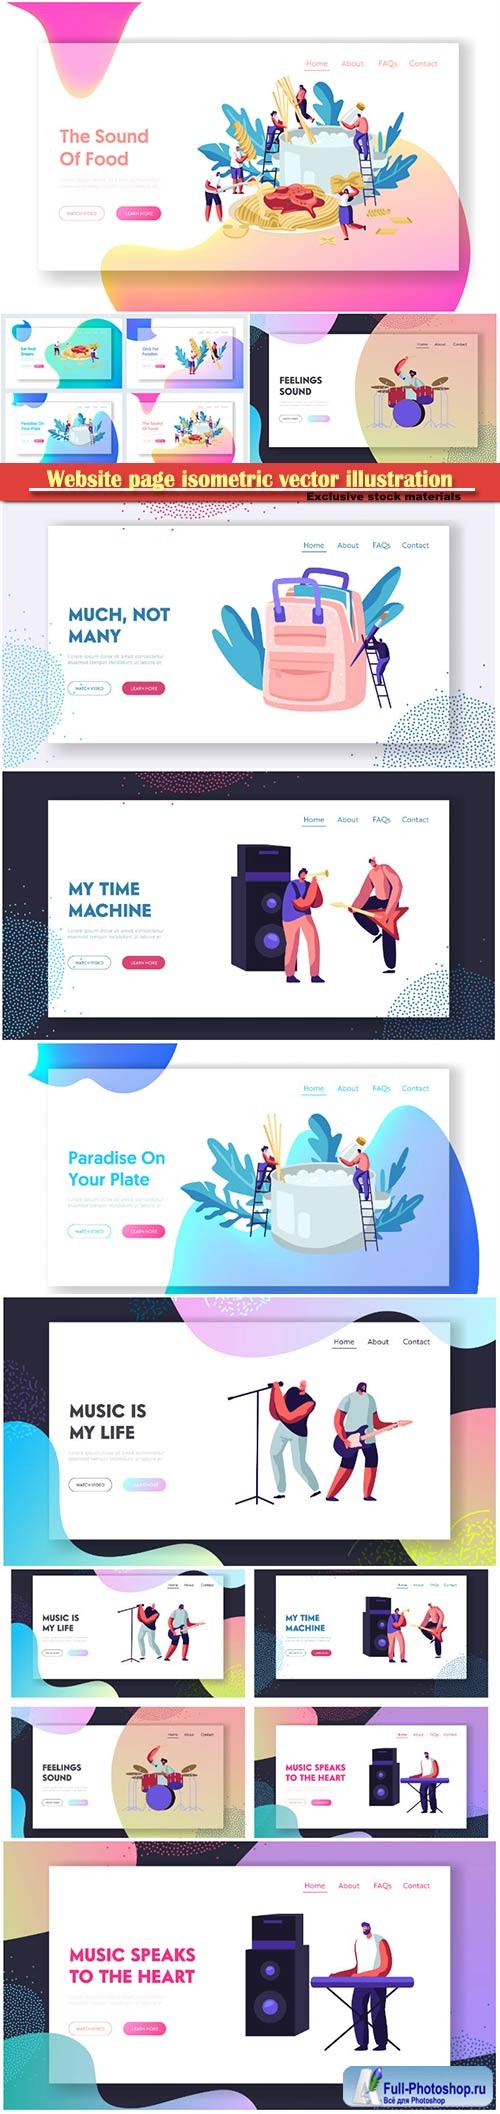 Website page isometric vector illustration, flat banner # 2